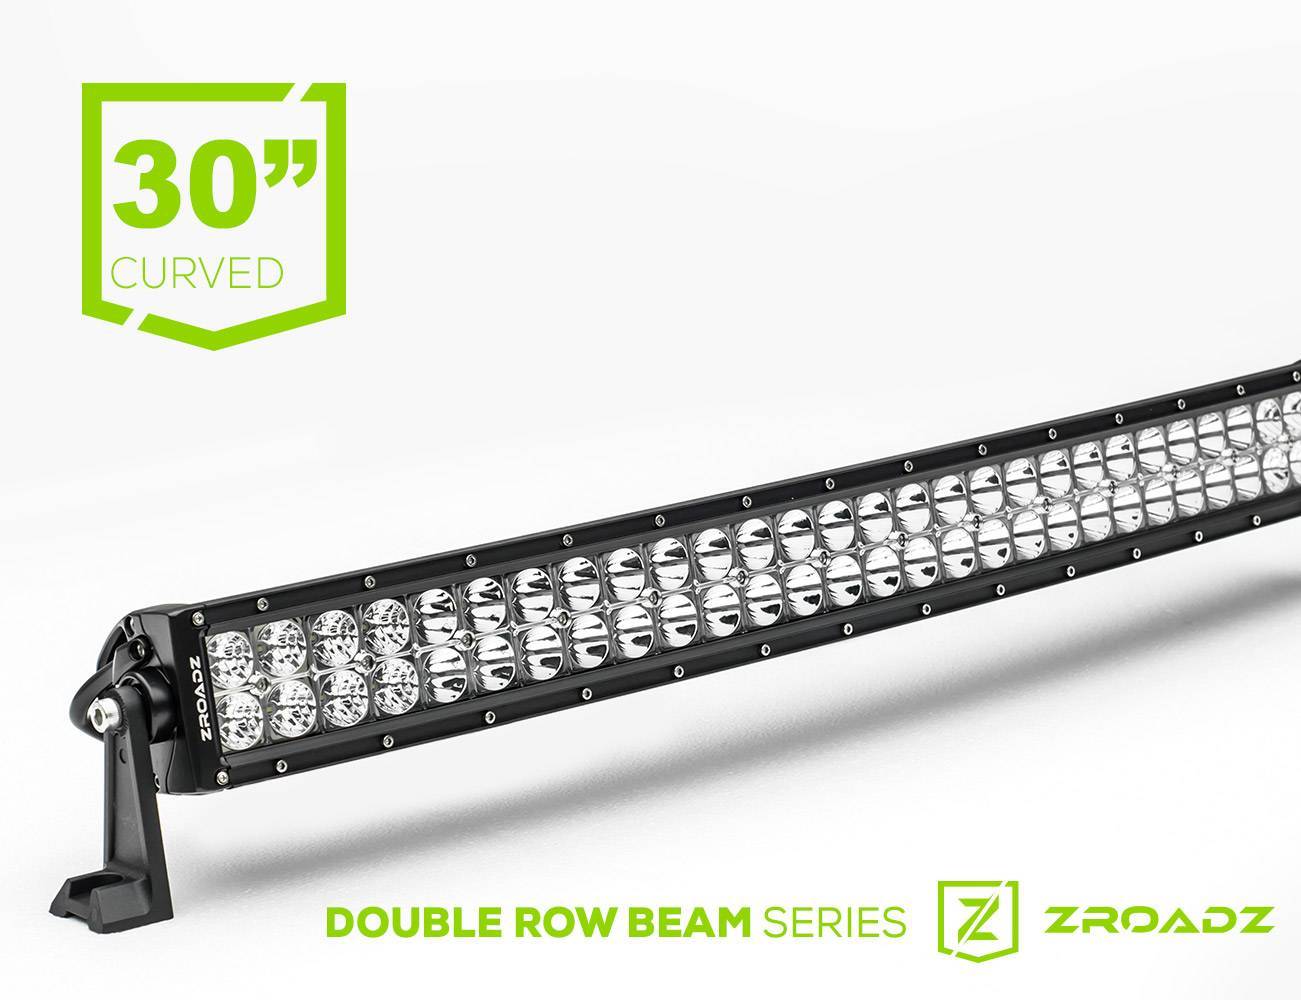 ZROADZ OFF ROAD PRODUCTS - 30 Inch LED Curved Double Row Light Bar - Part # Z30CBC14W180